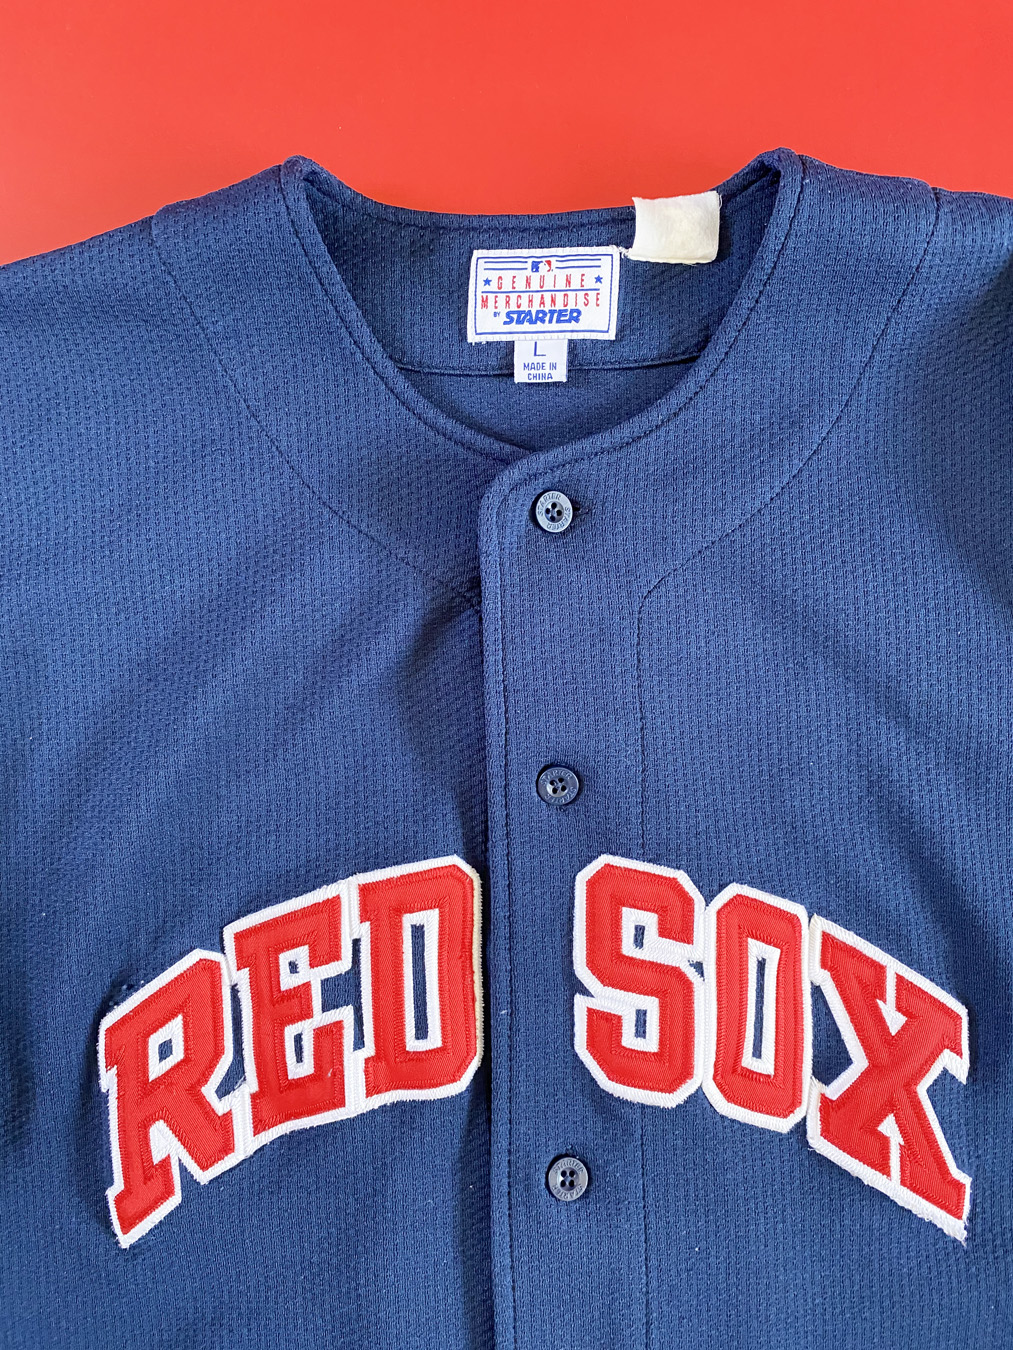 90's Nomar Garciaparra Boston Red Sox Russell Authentic MLB Jersey Size 44  Large – Rare VNTG